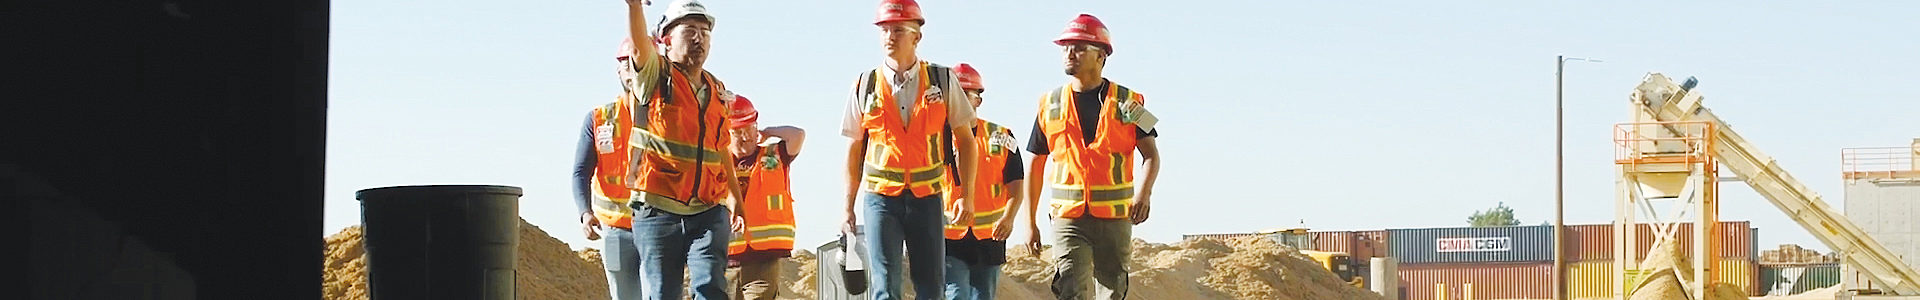 A group of construction workers in conversation walking toward the camera with equipment in the background